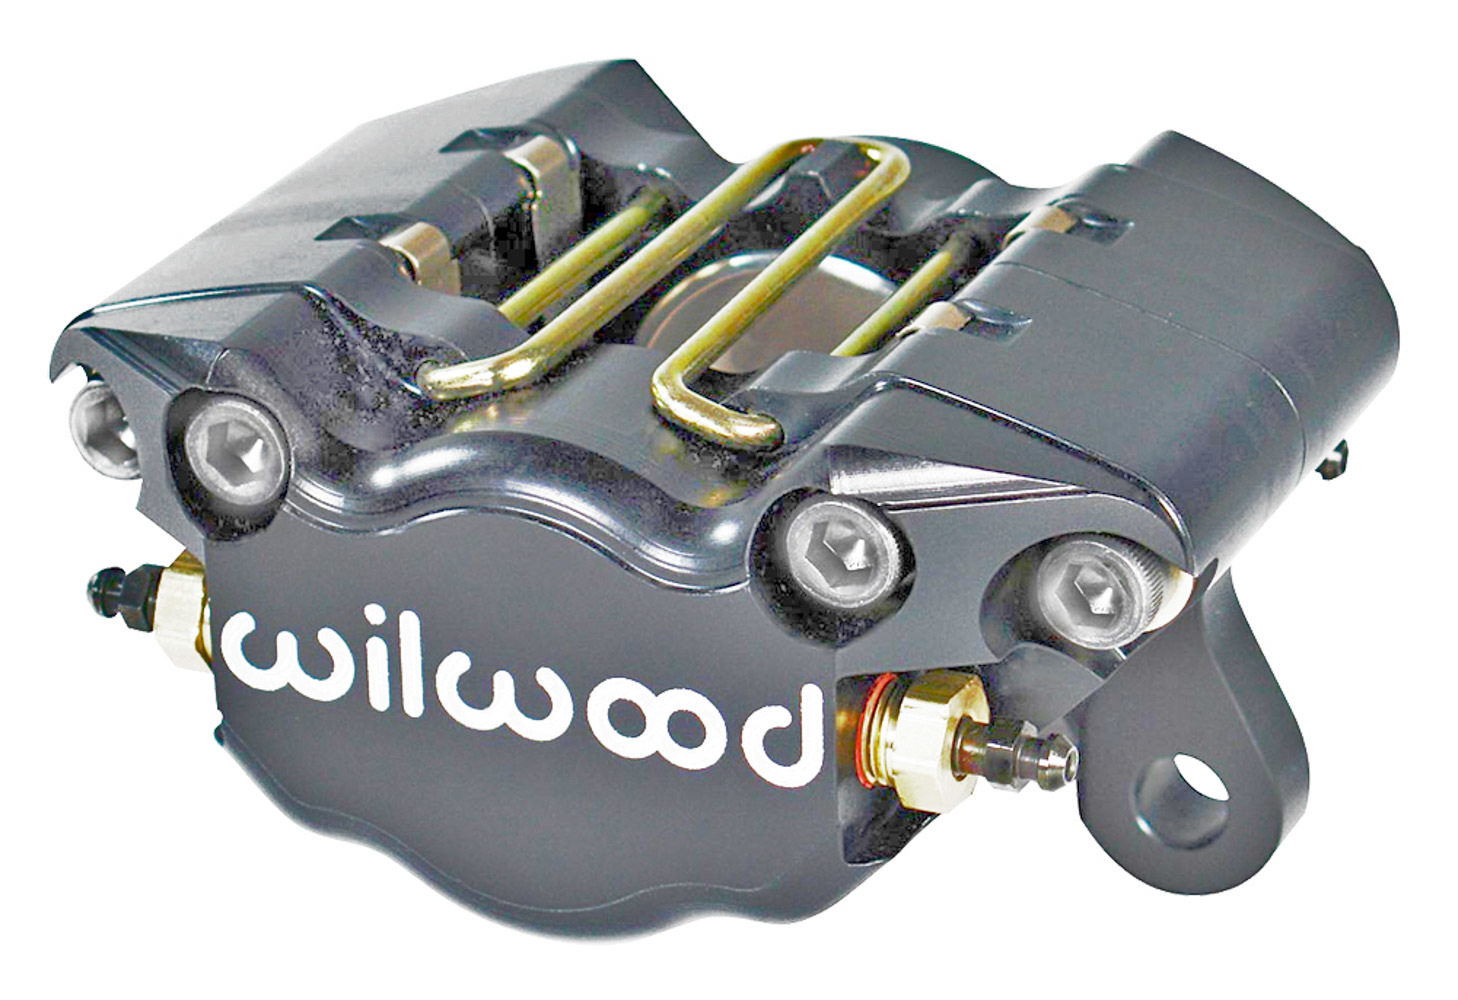 Wilwood 120-9689-LP Brake Caliper, Dynapro, 2 Piston, Billet Aluminum, Gray Anodized, 13.000 in OD x 0.200 in Thick Rotor, 3.750 in Lug Mount, Each